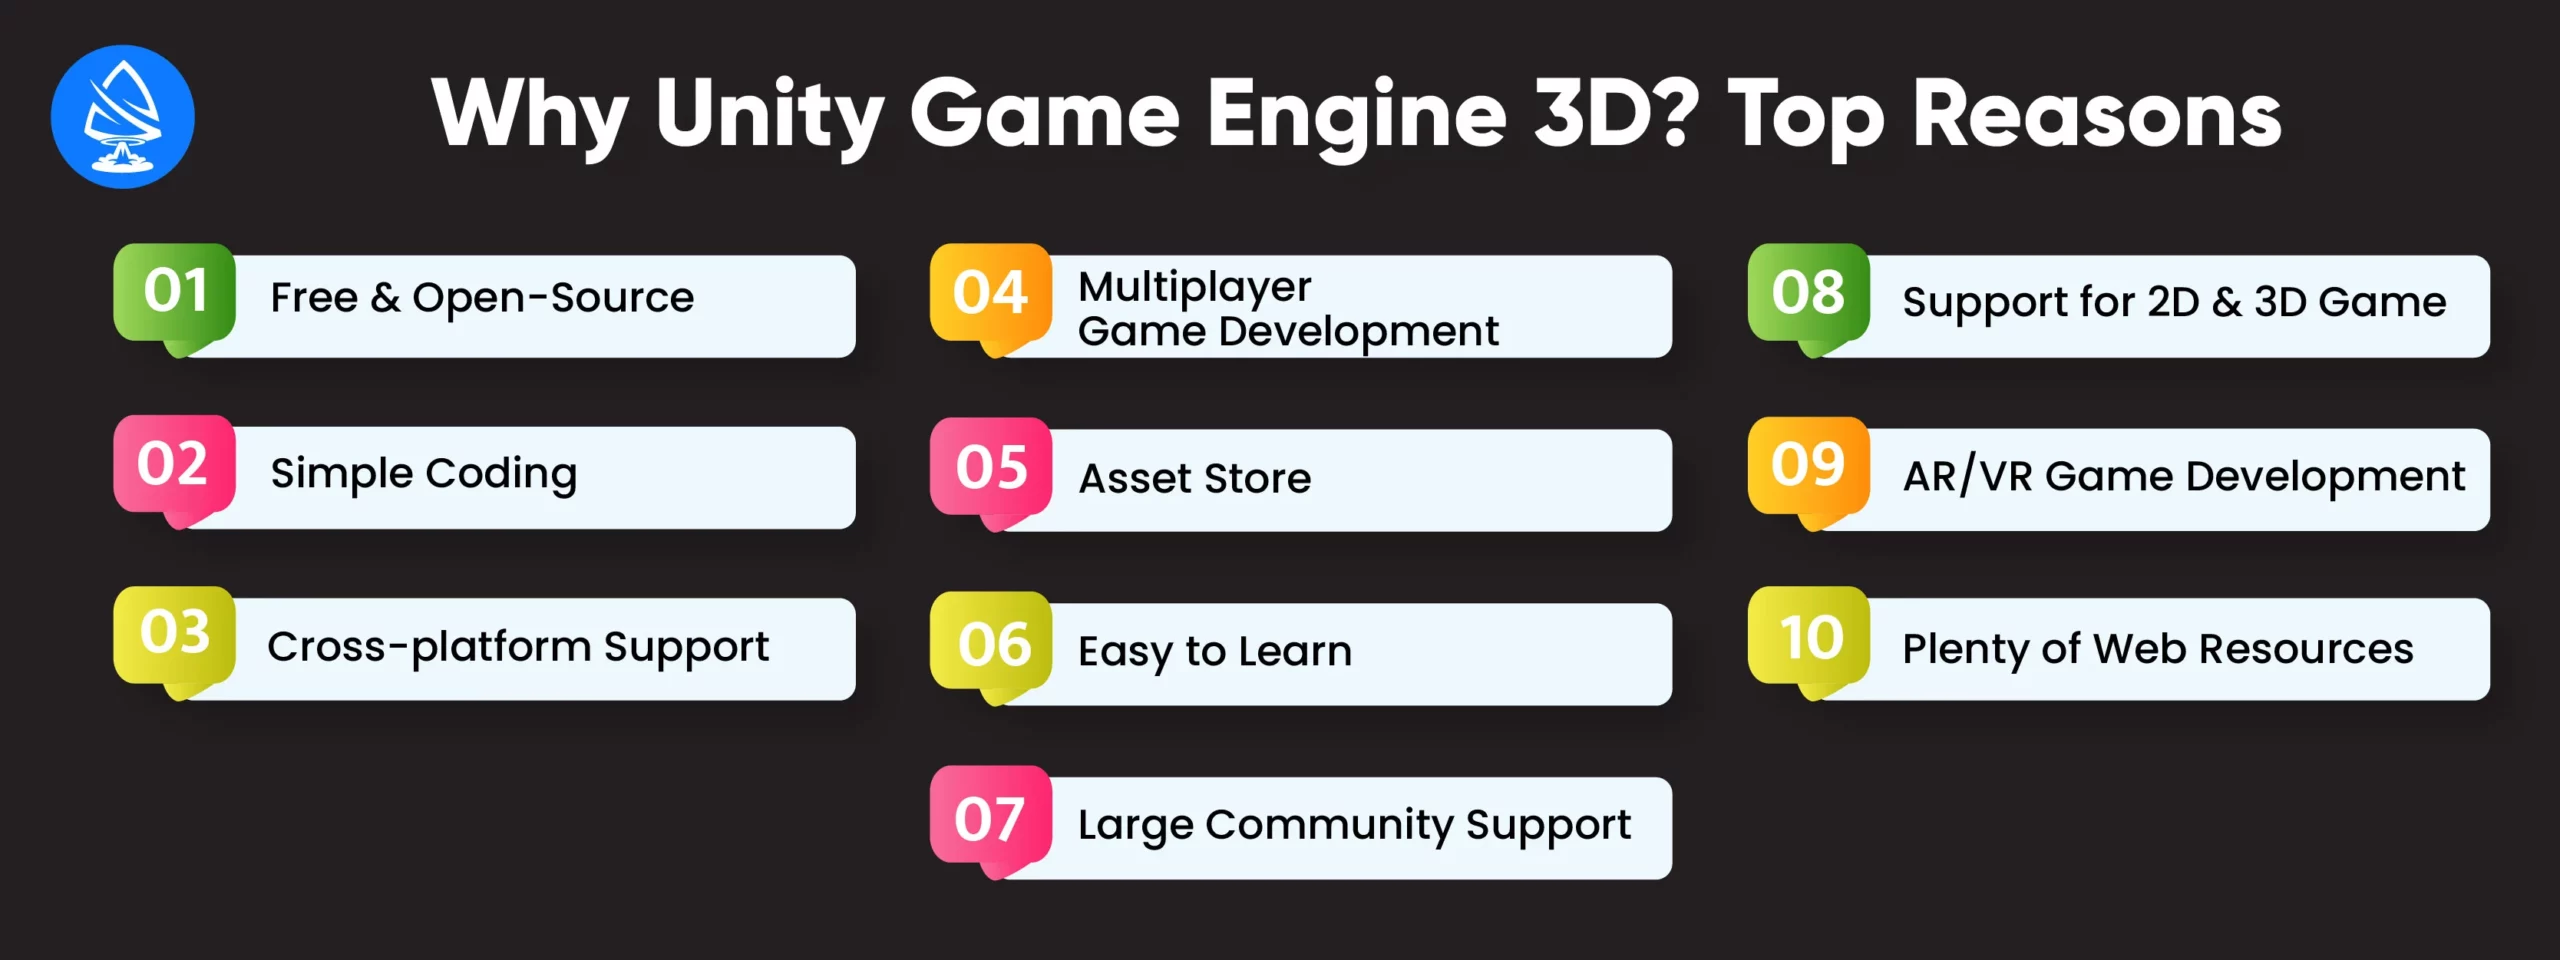 Why Unity Game Engine 3D? Top Reasons 